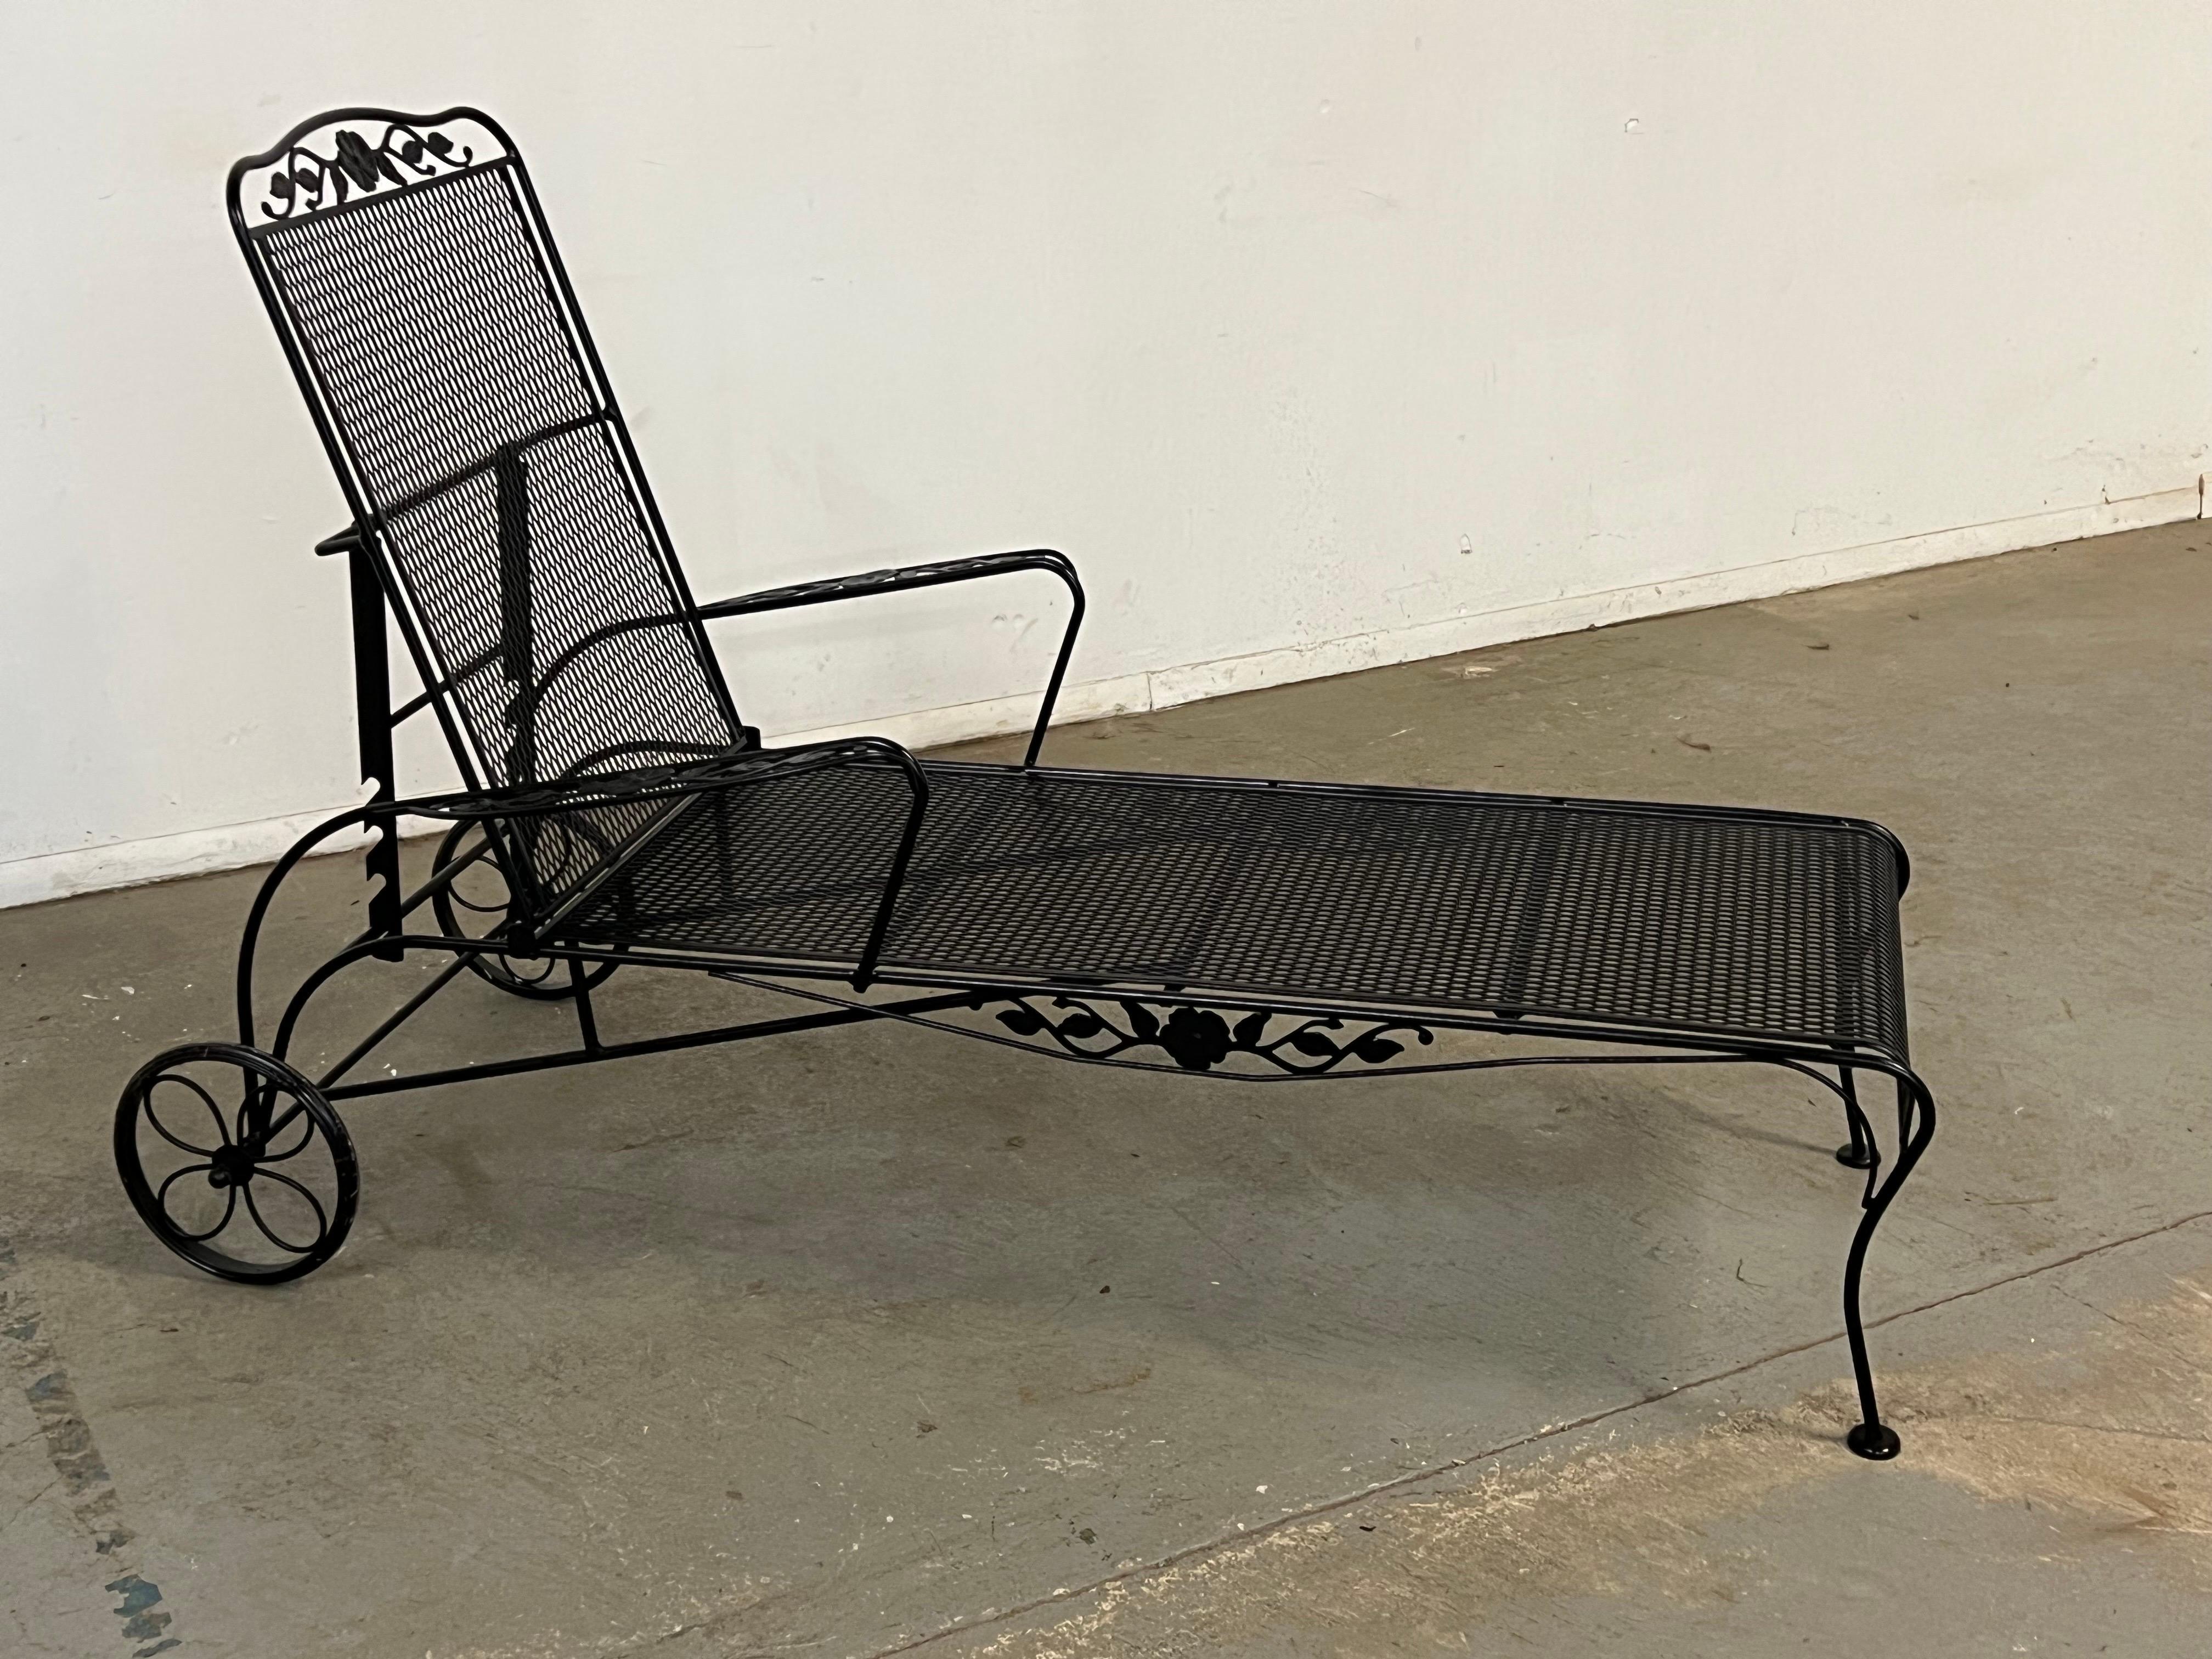  Woodard style outdoor Iron Chaise Lounge Chair

Offered is a floral Woodard style chaise lounge chair. This chair is in overall good structural condition with paint chipping and age wear. Features two arm rests and an adjustable back. The chaise is